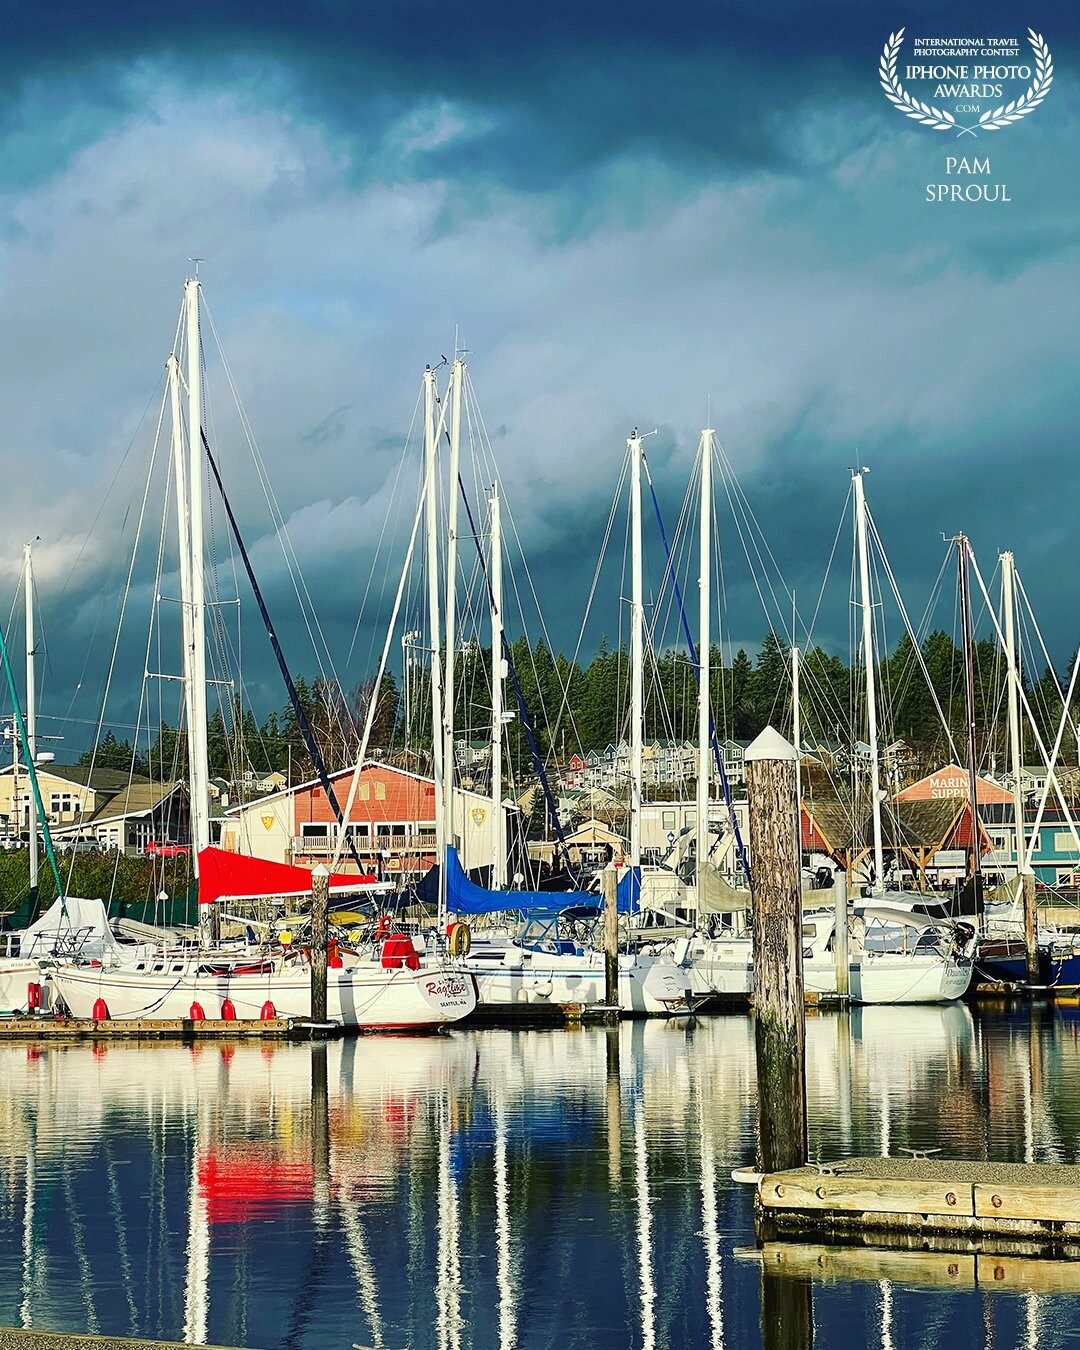 After a very rainy last 3 months the sun came out with such a beautiful contrast to the sky in beautiful Liberty Bay in Poulsbo Wa in the Pacific Northwest <br />
<br />
Liberty Bay reflections -2021